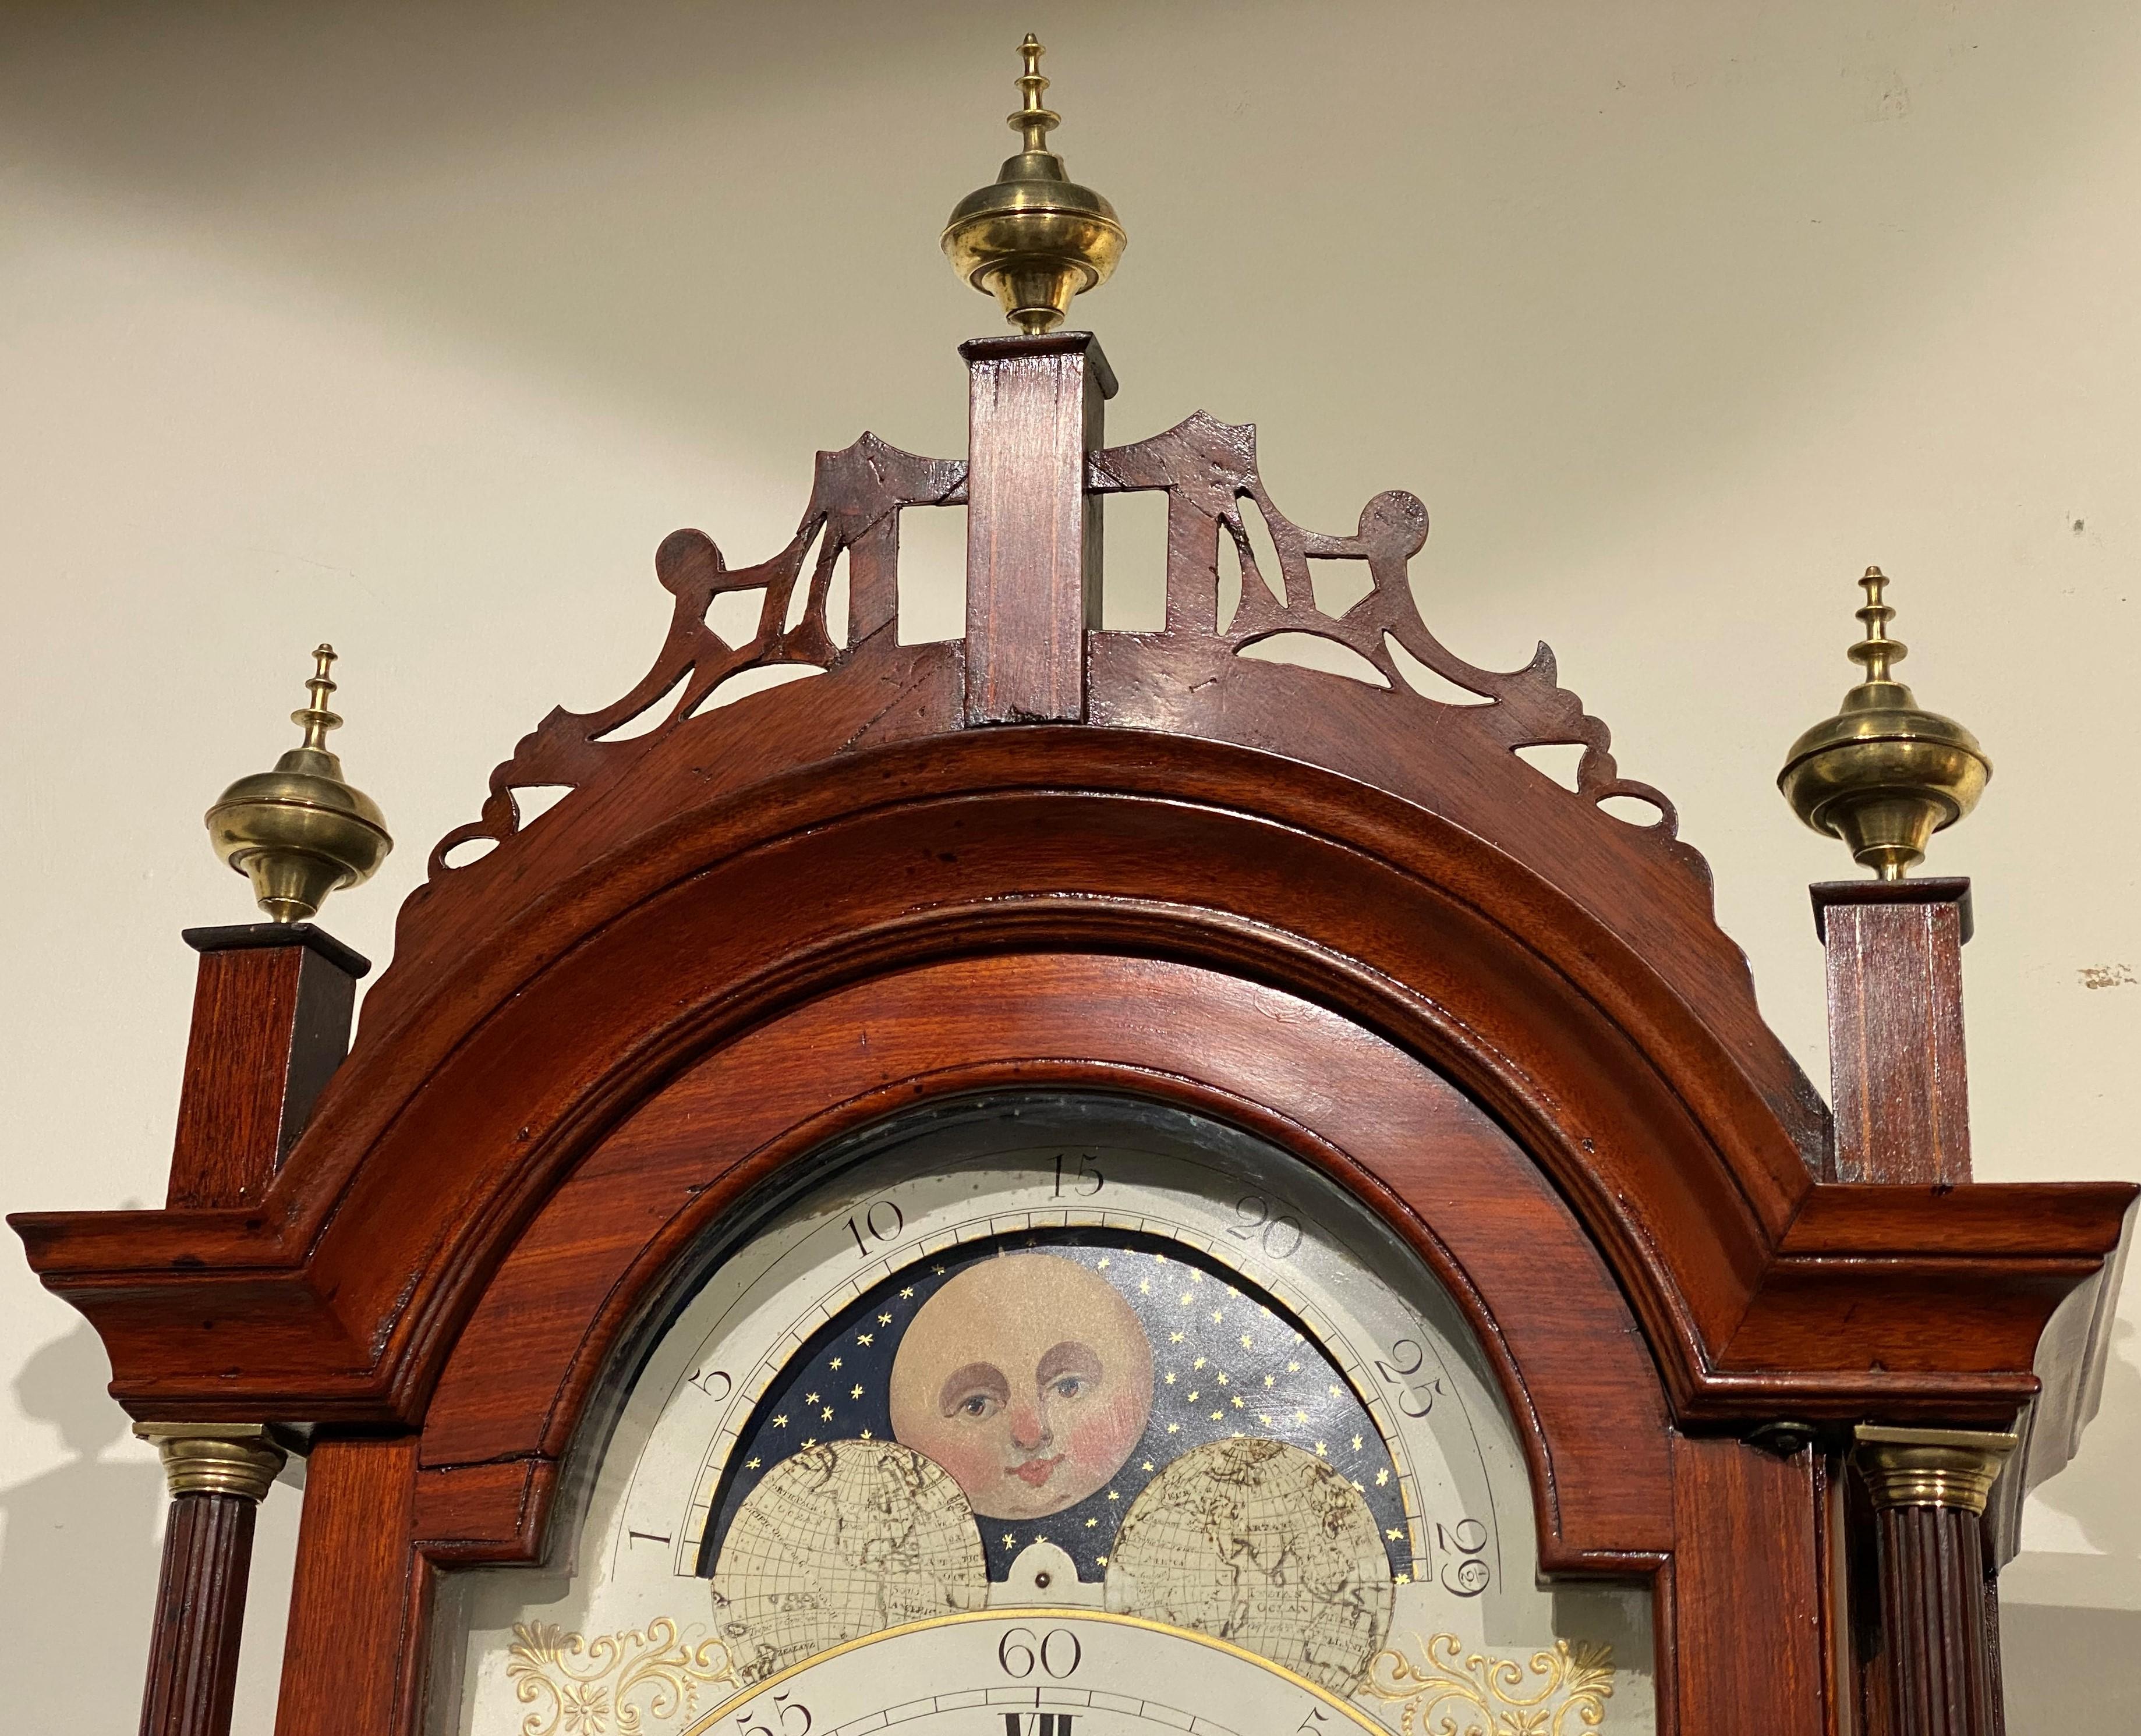 A fine mahogany tall case clock with wonderful proportions by Aaron Willard (1757-1844), with a reticulated carved crest with three ball and spire finials surmounting an arched glass hood door, opening to a hand painted metal Roman numeral dial,